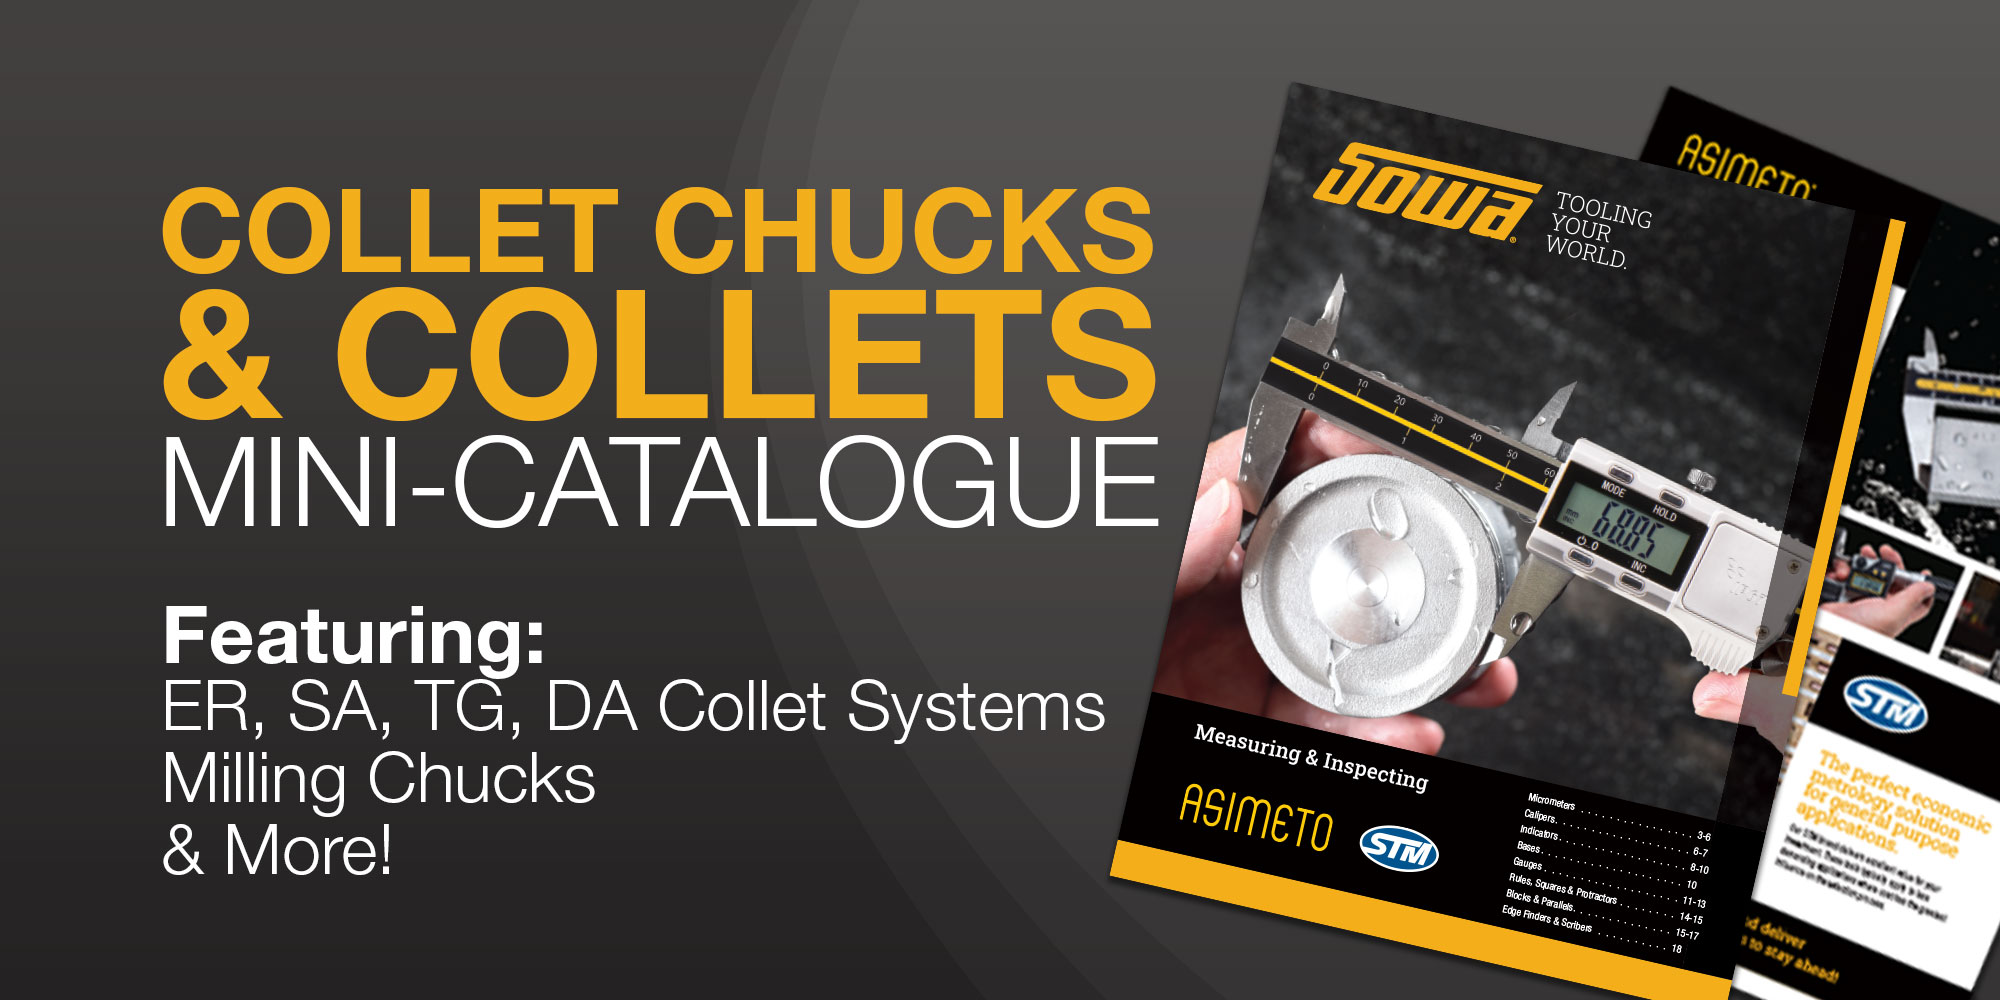 New Sowa Tool Collet Chuck & Collet Mini-Catalogue